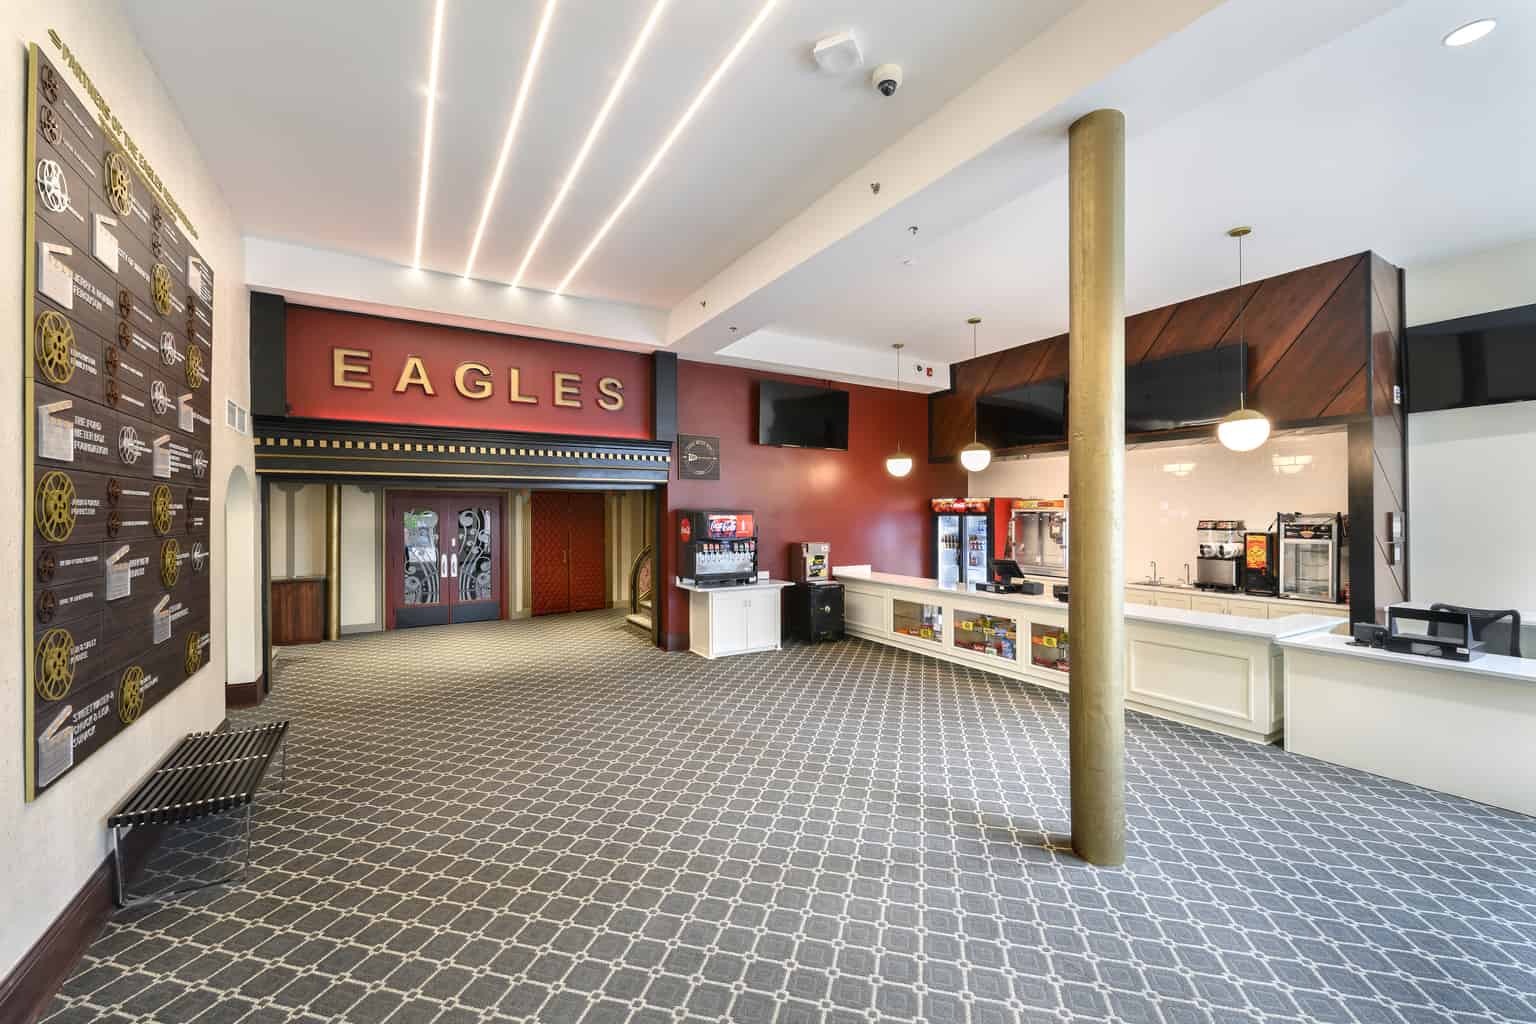 Inside the Eagles Theatre lobby